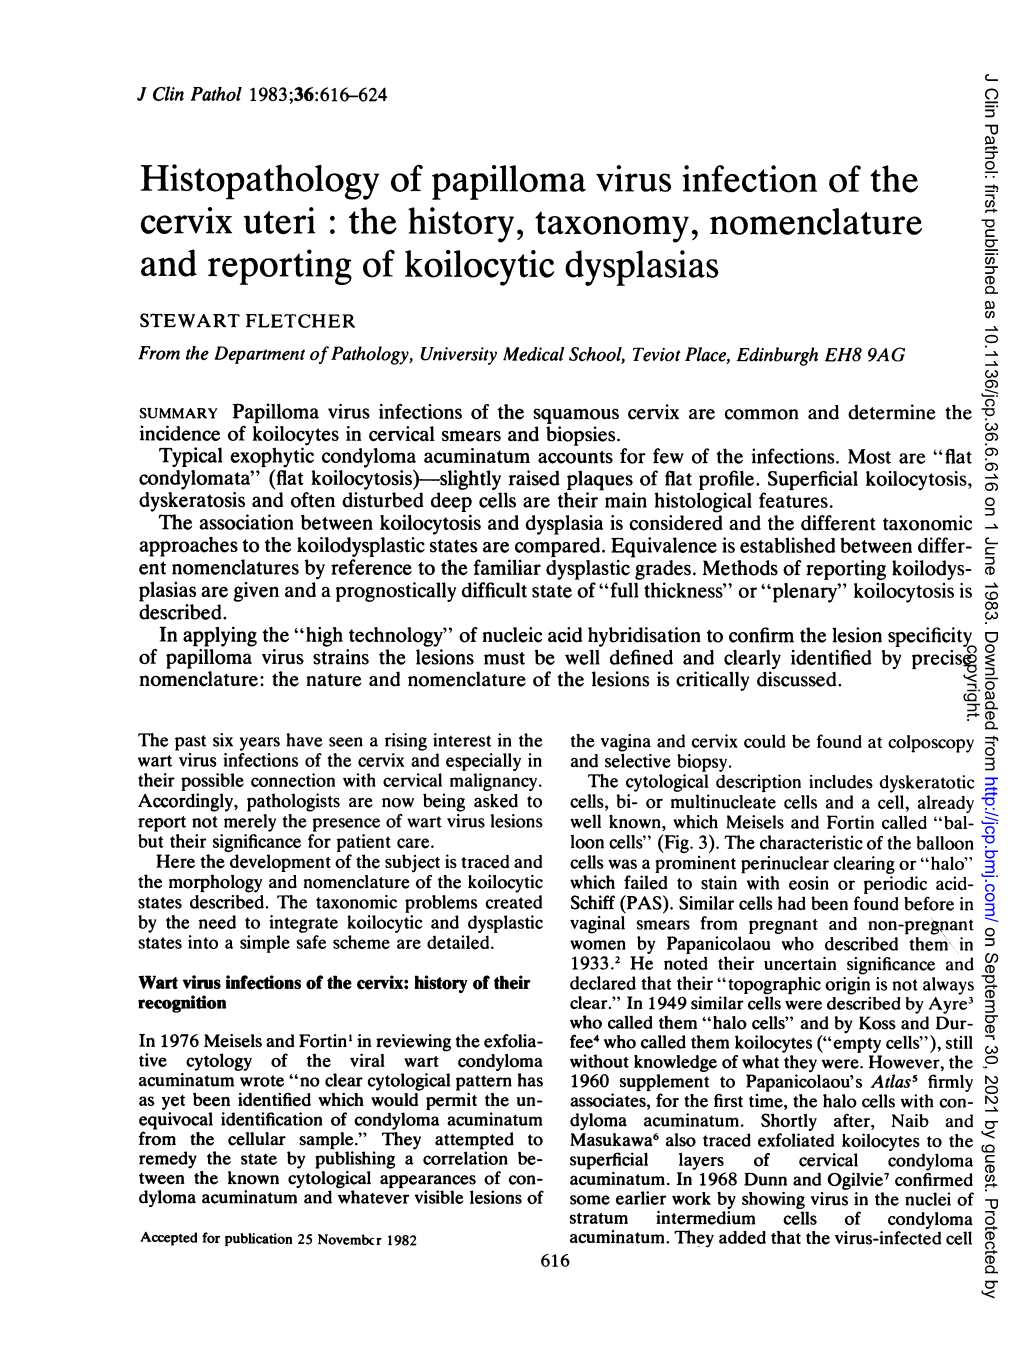 Histopathology of Papilloma Virus Infection of the Cervix Uteri : the History, Taxonomy, Nomenclature and Reporting of Koilocytic Dysplasias